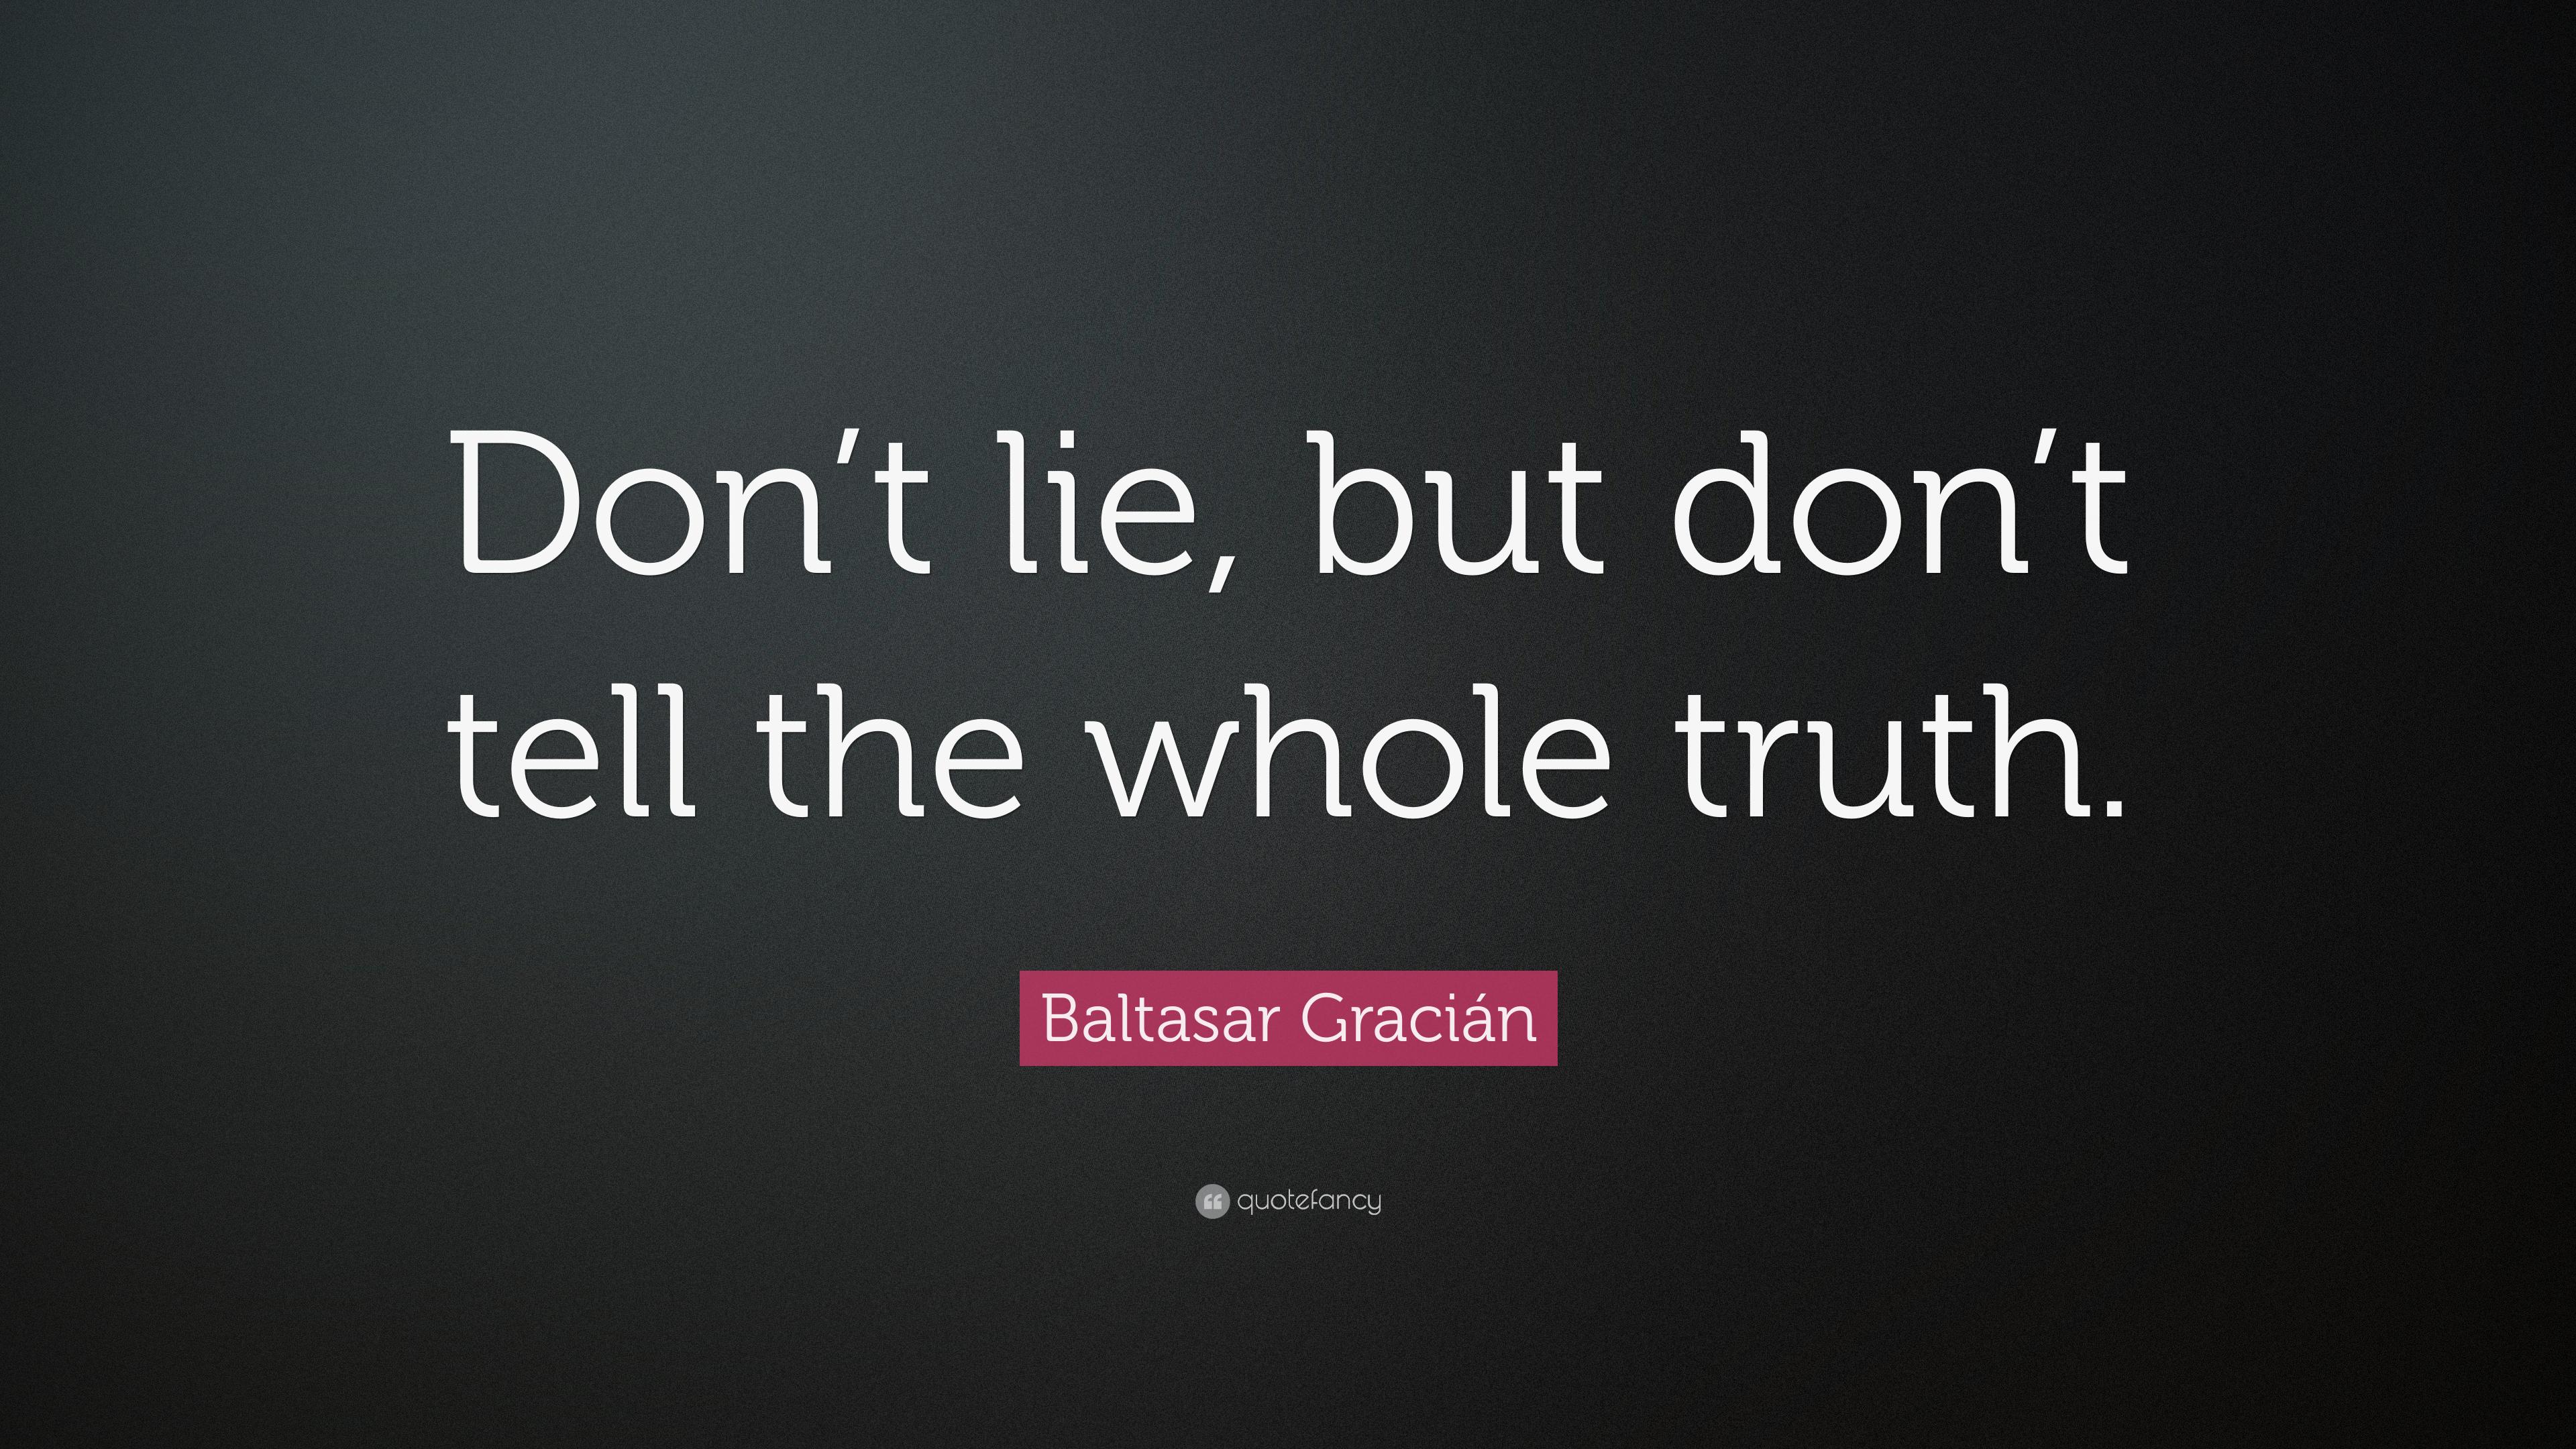 Baltasar Gracián Quote: “Don't lie, but don't tell the whole truth